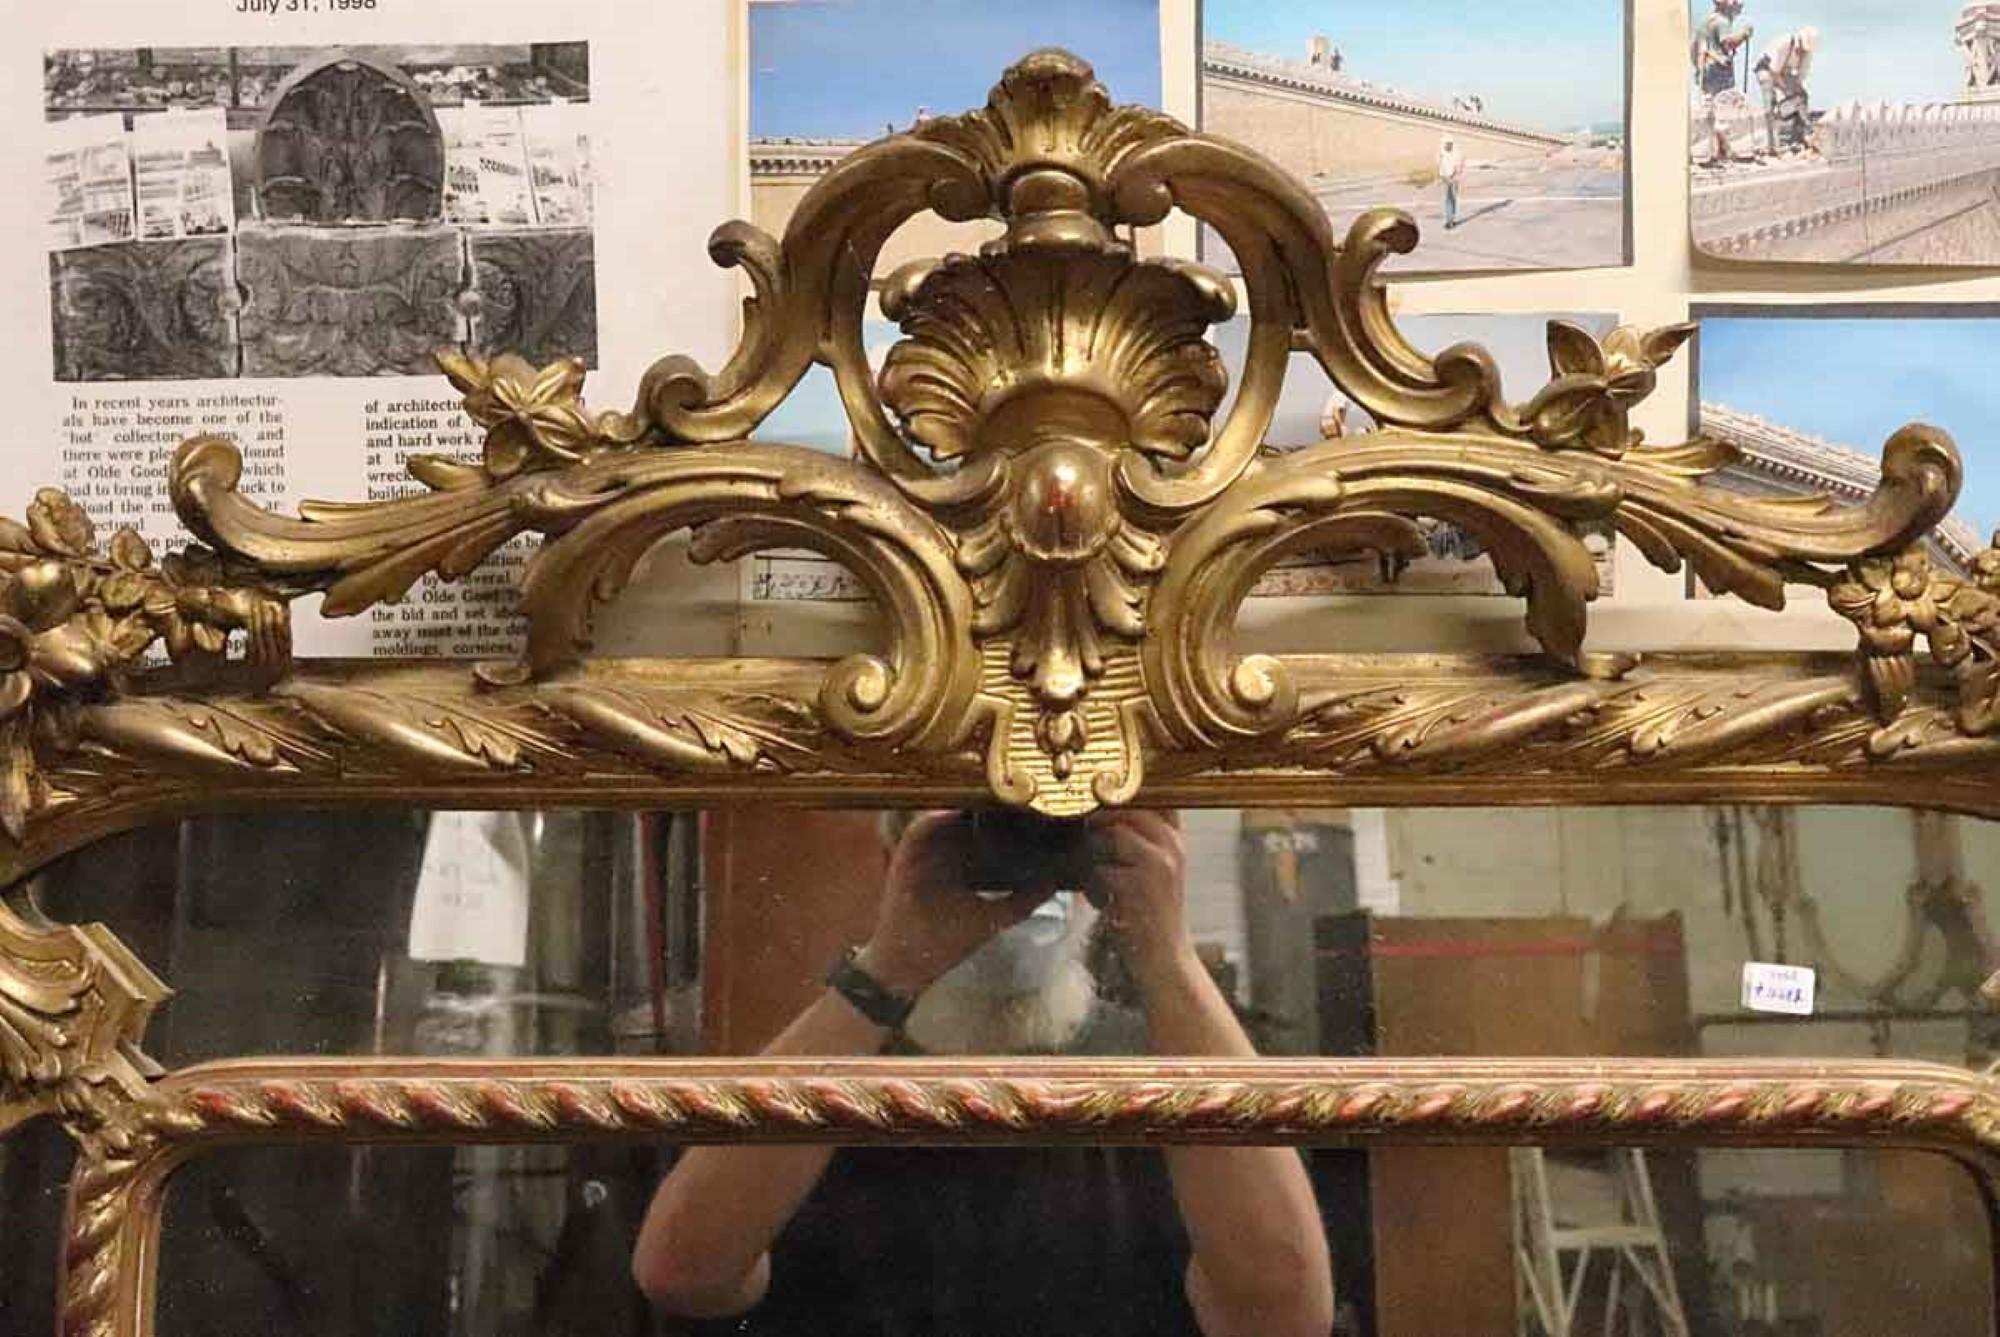 1920s decorative French gilded mirror with floral detailing. Minor damages, please see photos. This can be viewed at one of our New York City locations. Please inquire for the exact address.